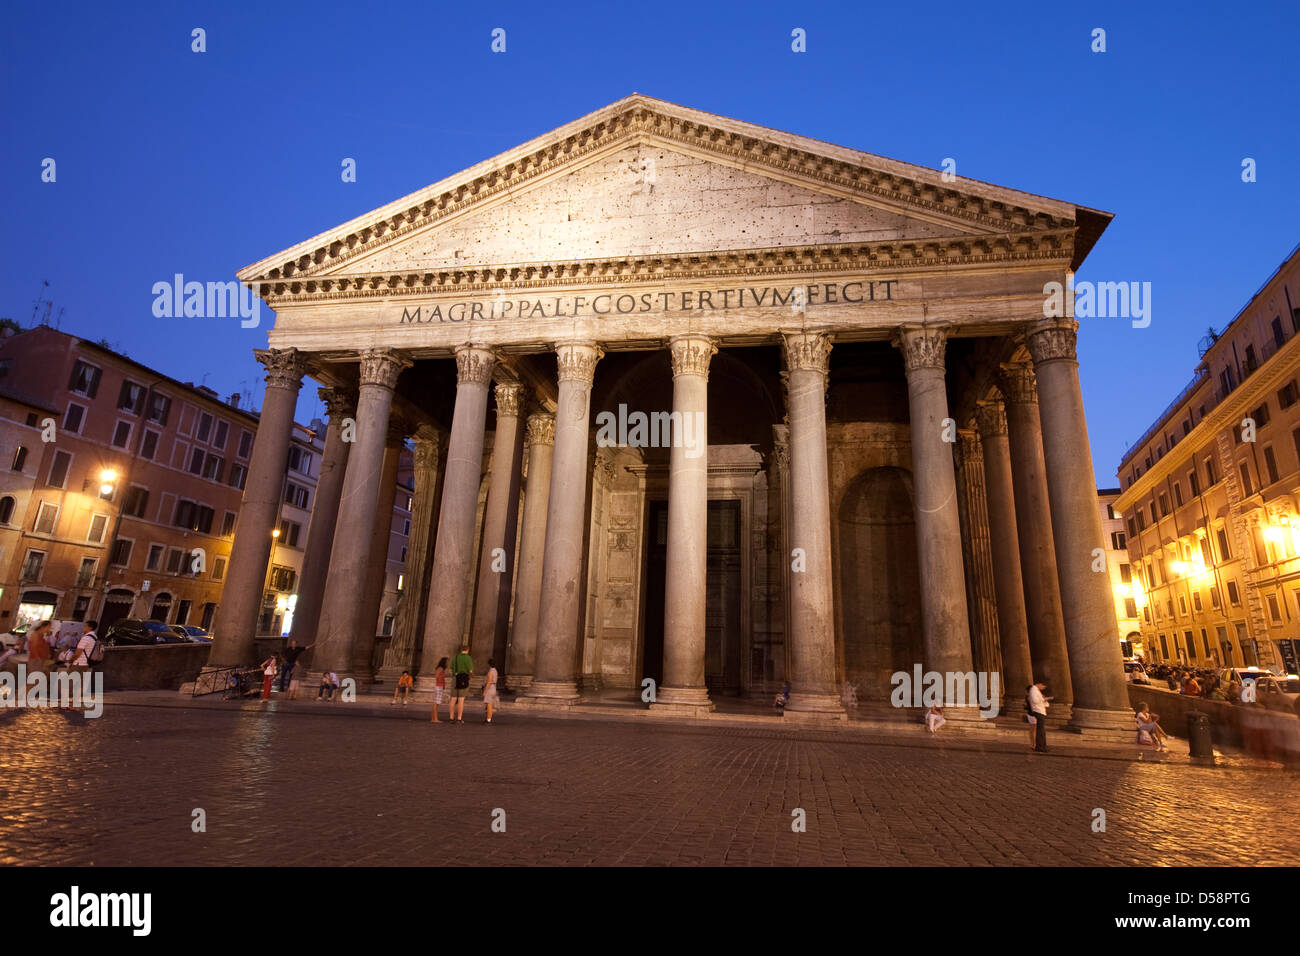 The Pantheon at twilight as seen from the Piazza della Rotonda in Rome, Italy Stock Photo